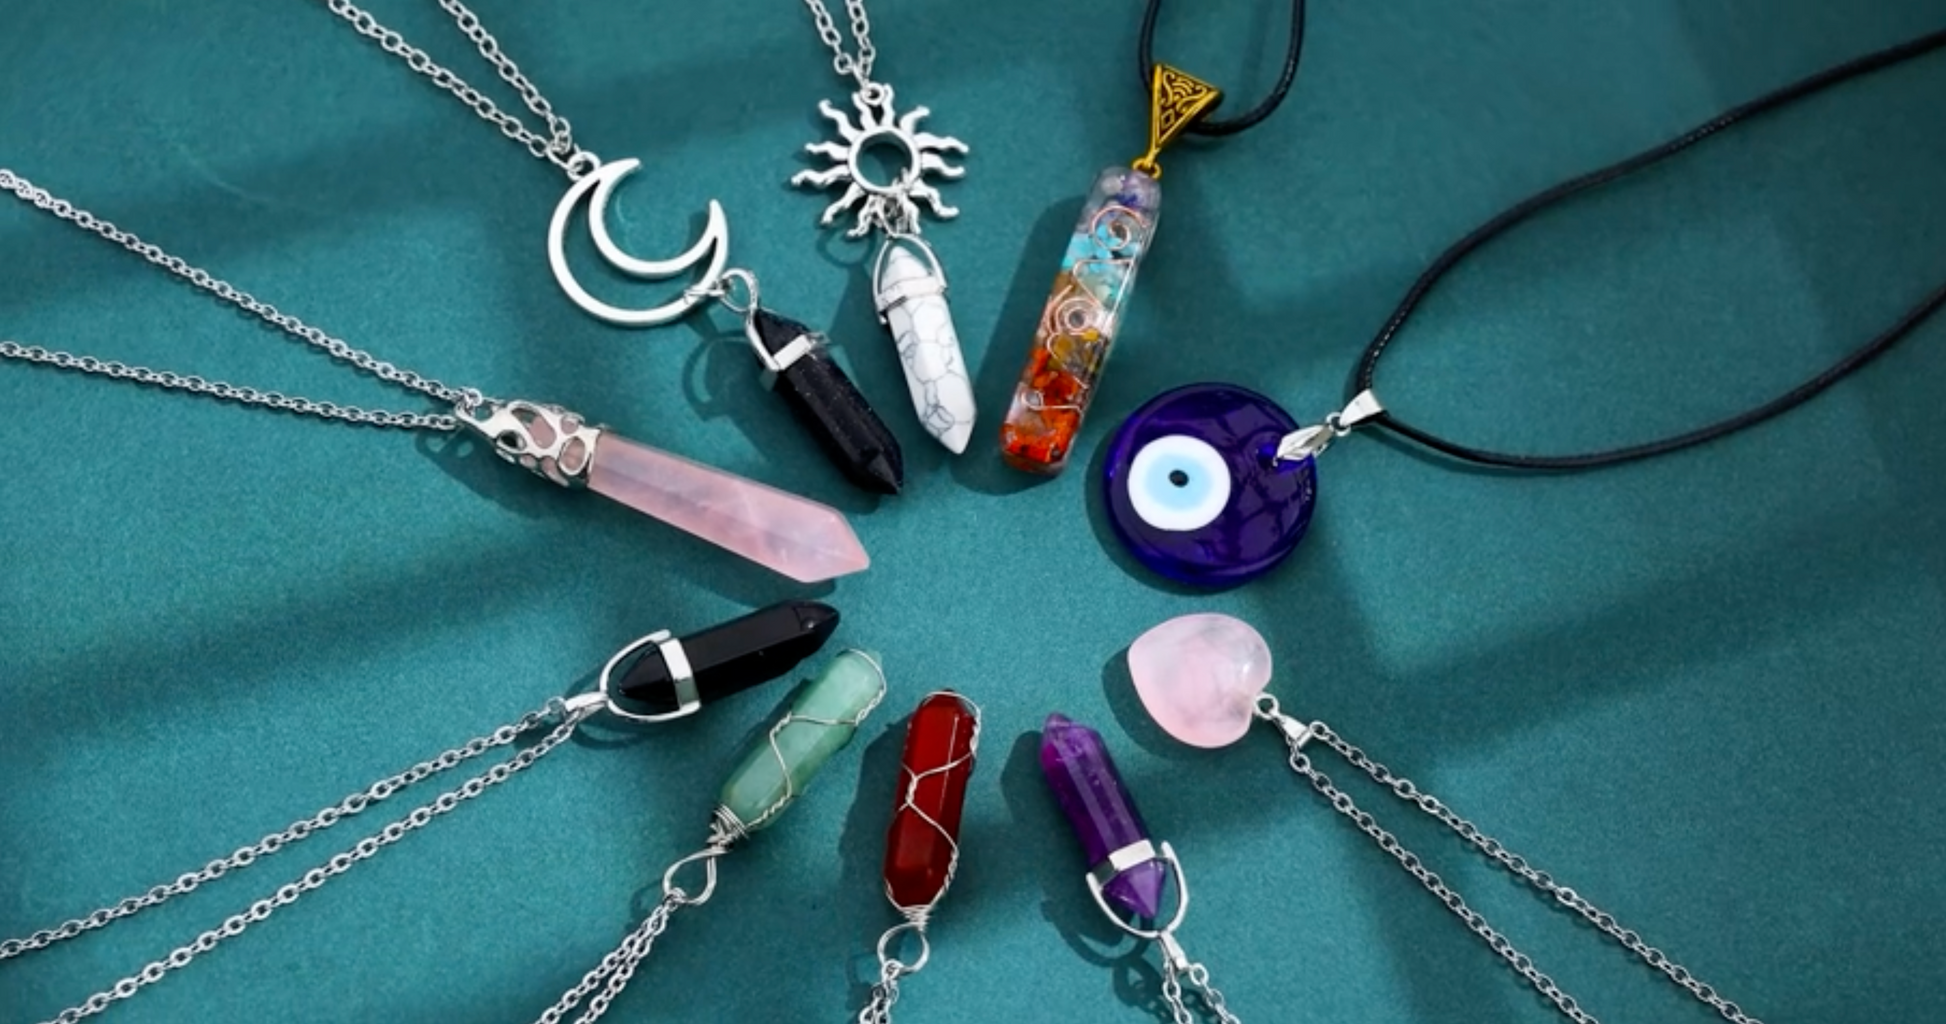 10 crystal necklaces arranged in a circle on a green felt cloth. Each necklace has a silver chain or black rope and they all feature a different colored crystal pendant.